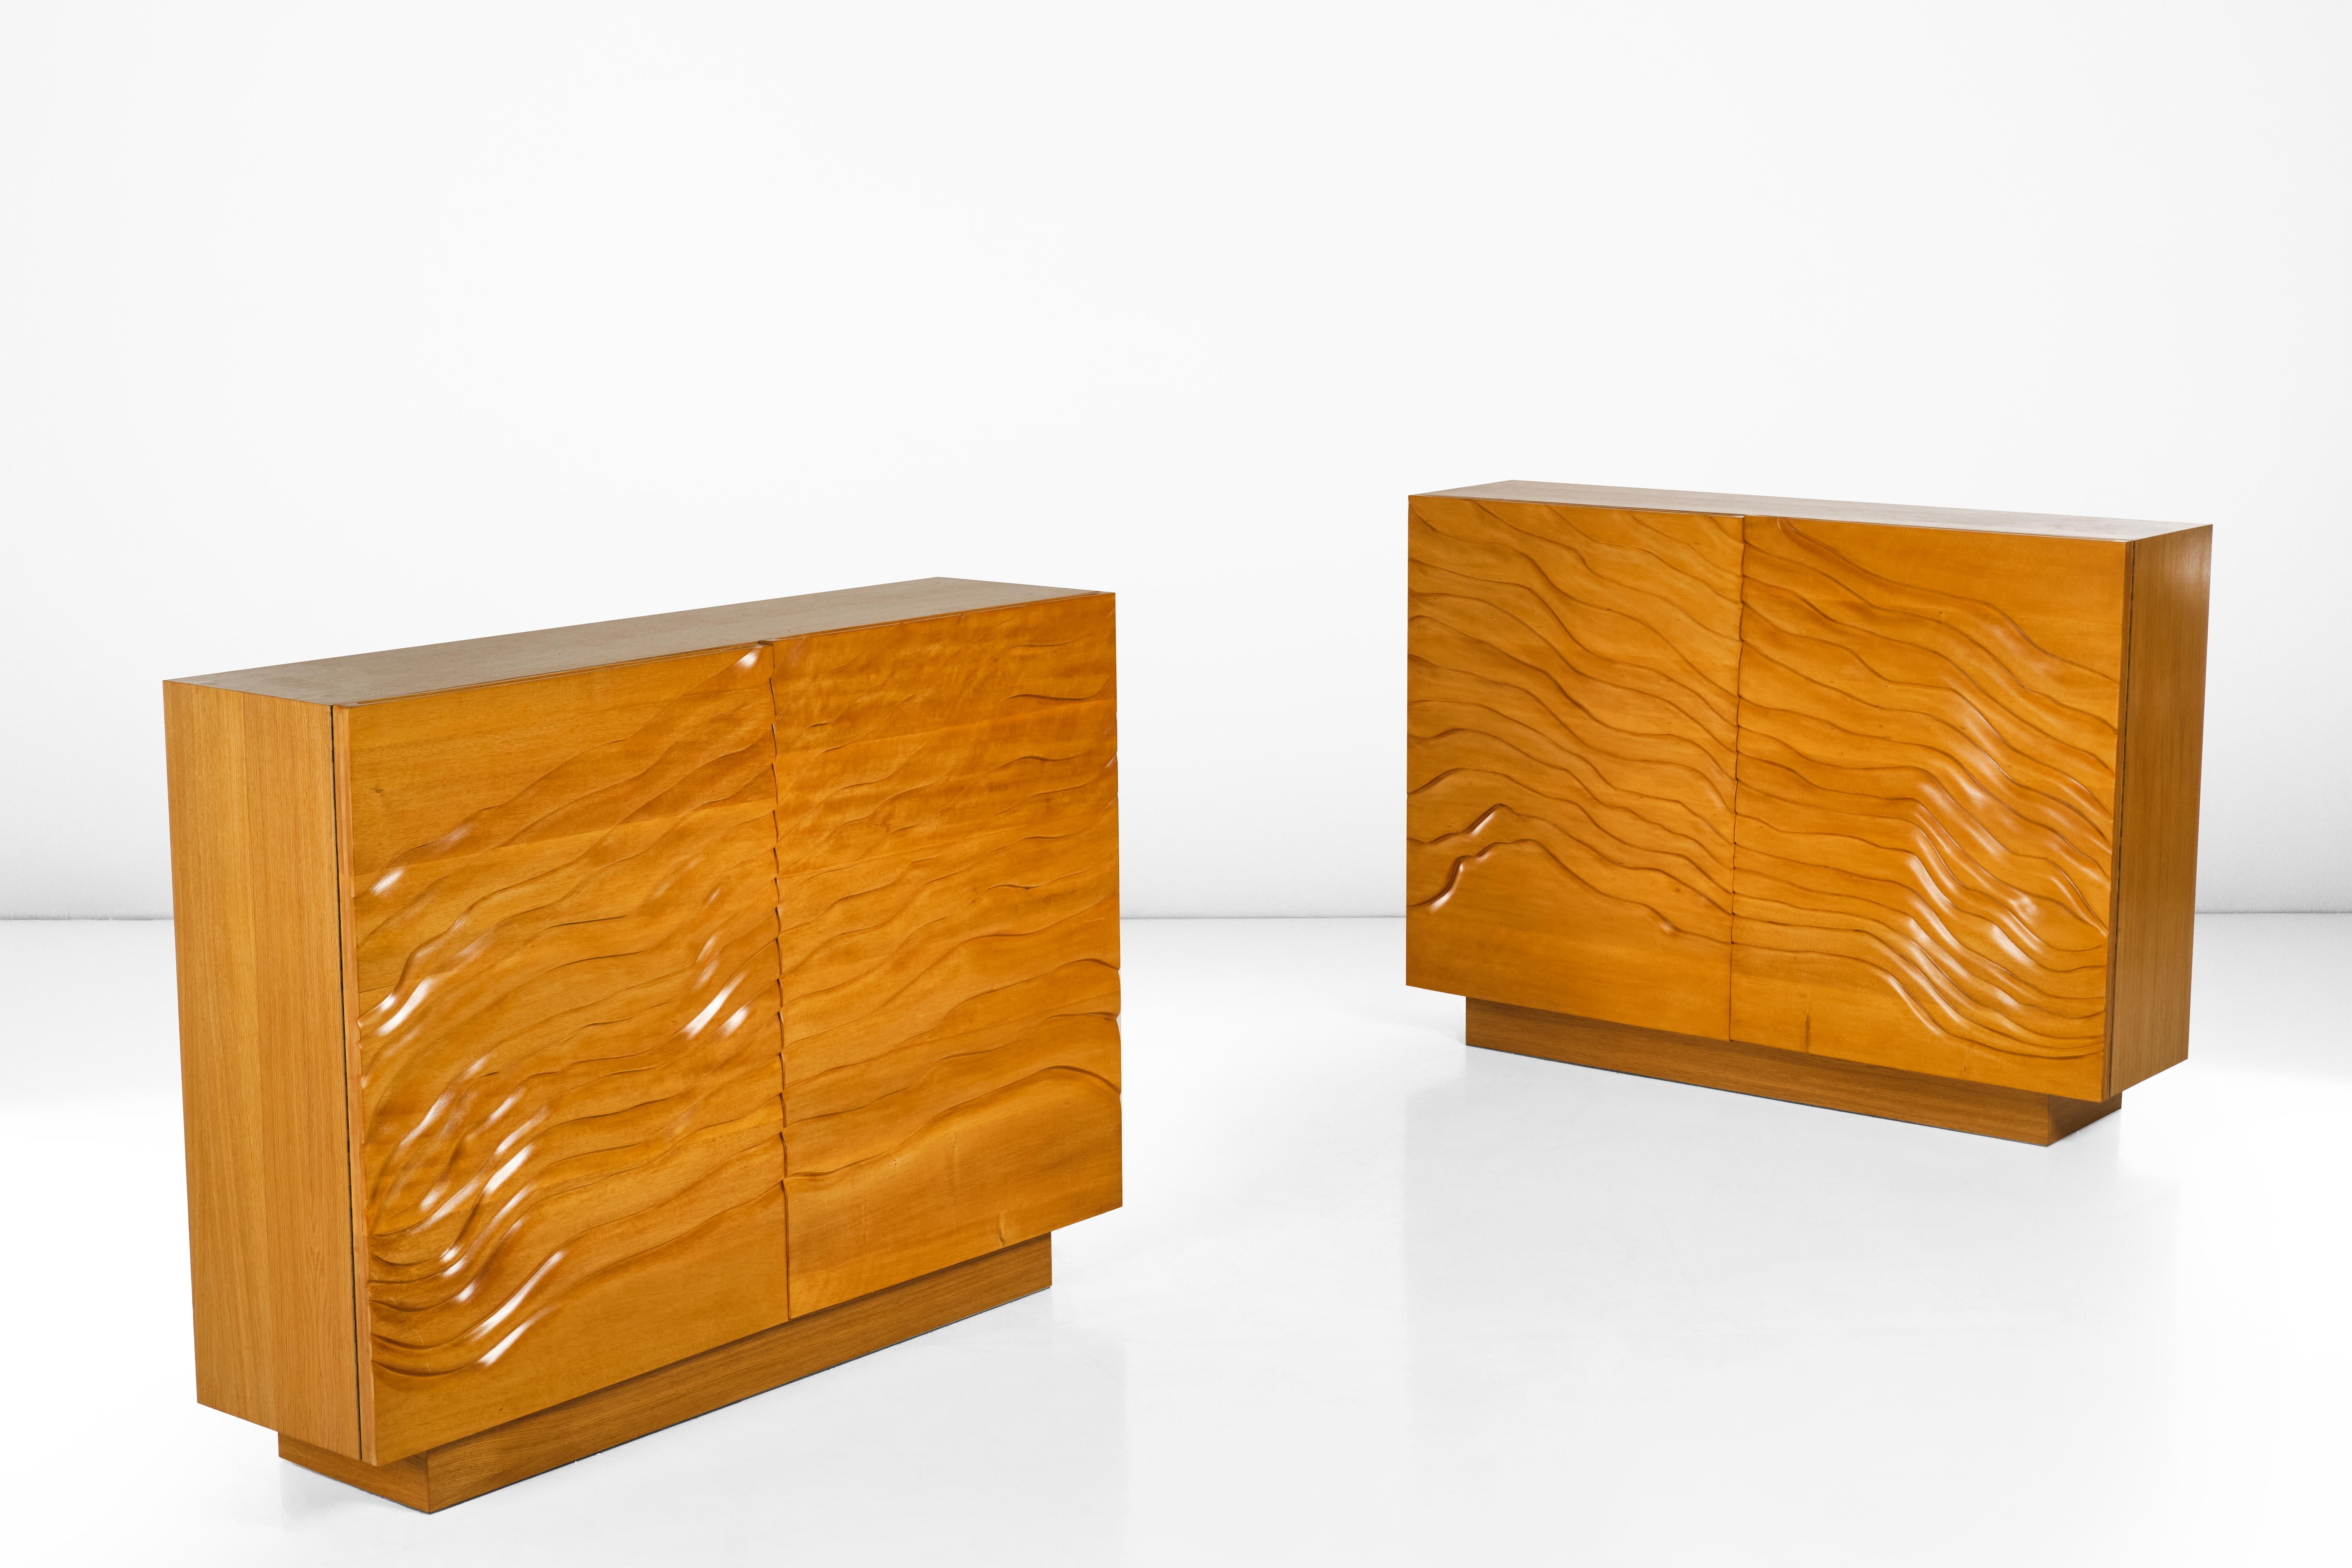 Pair of Sculptural Cabinets, Italian Design, 1960 circa In Good Condition For Sale In Milan, IT